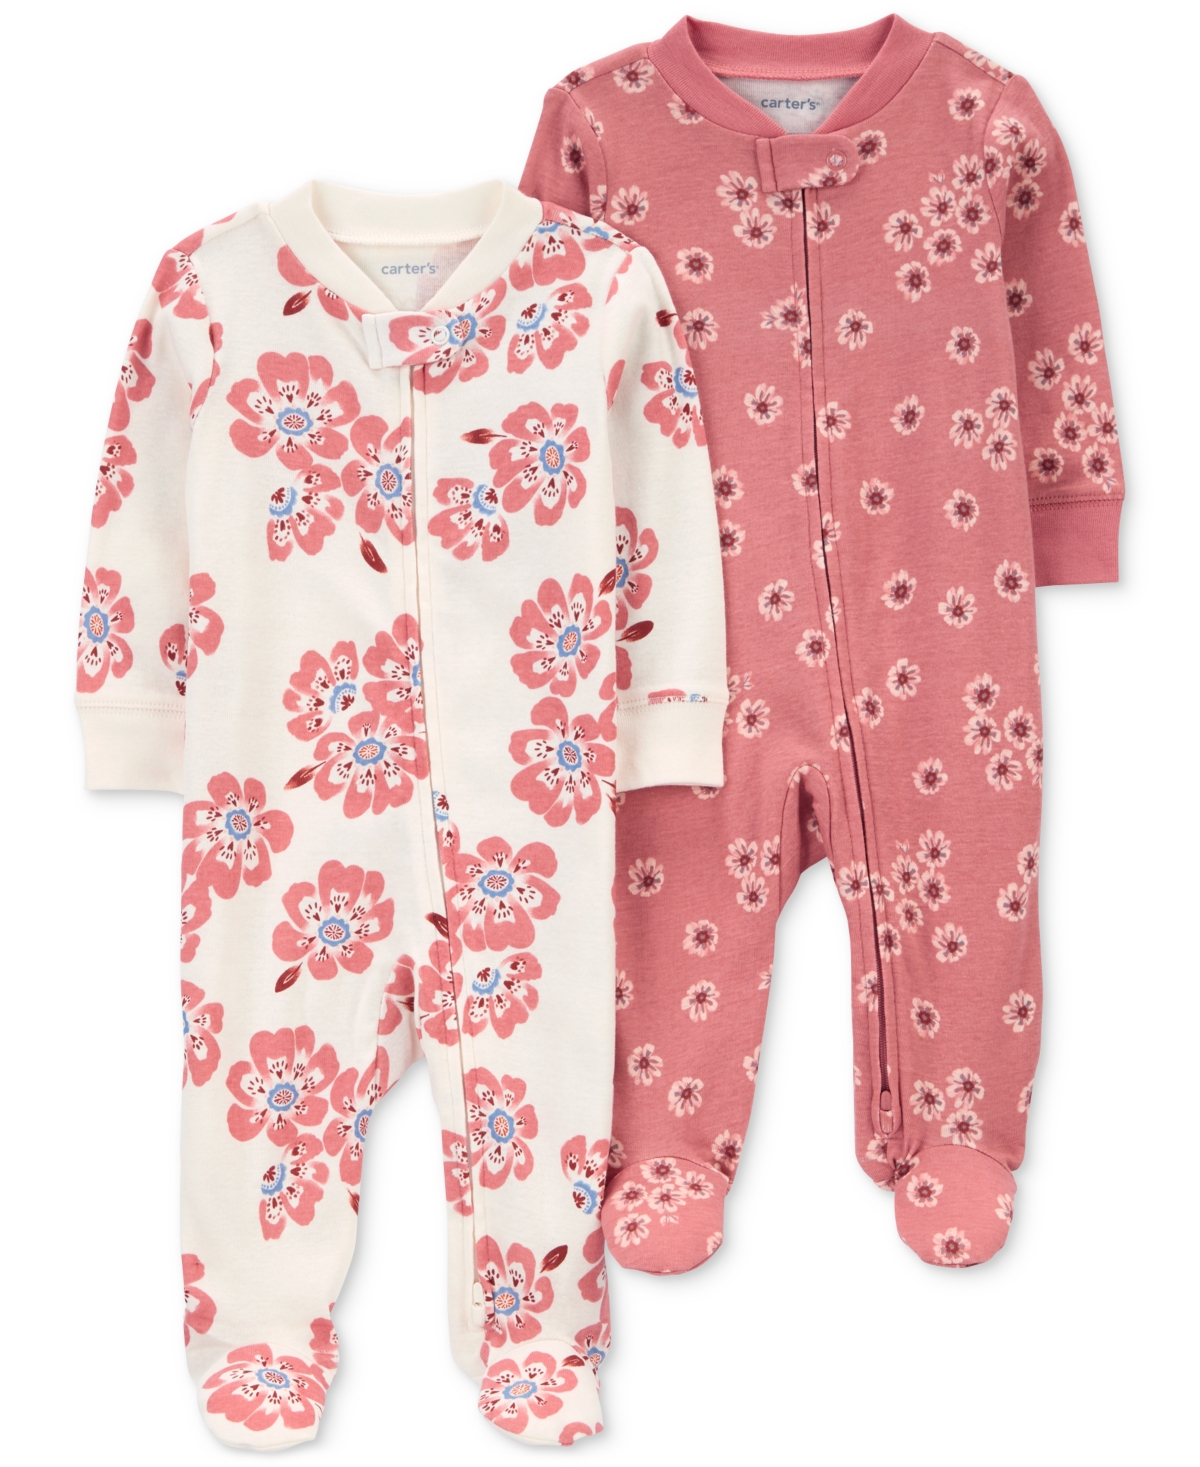 Carter's Baby Cotton 2-way-zip Footed Sleep And Play Coveralls, Pack Of 2 In Pink,ivory